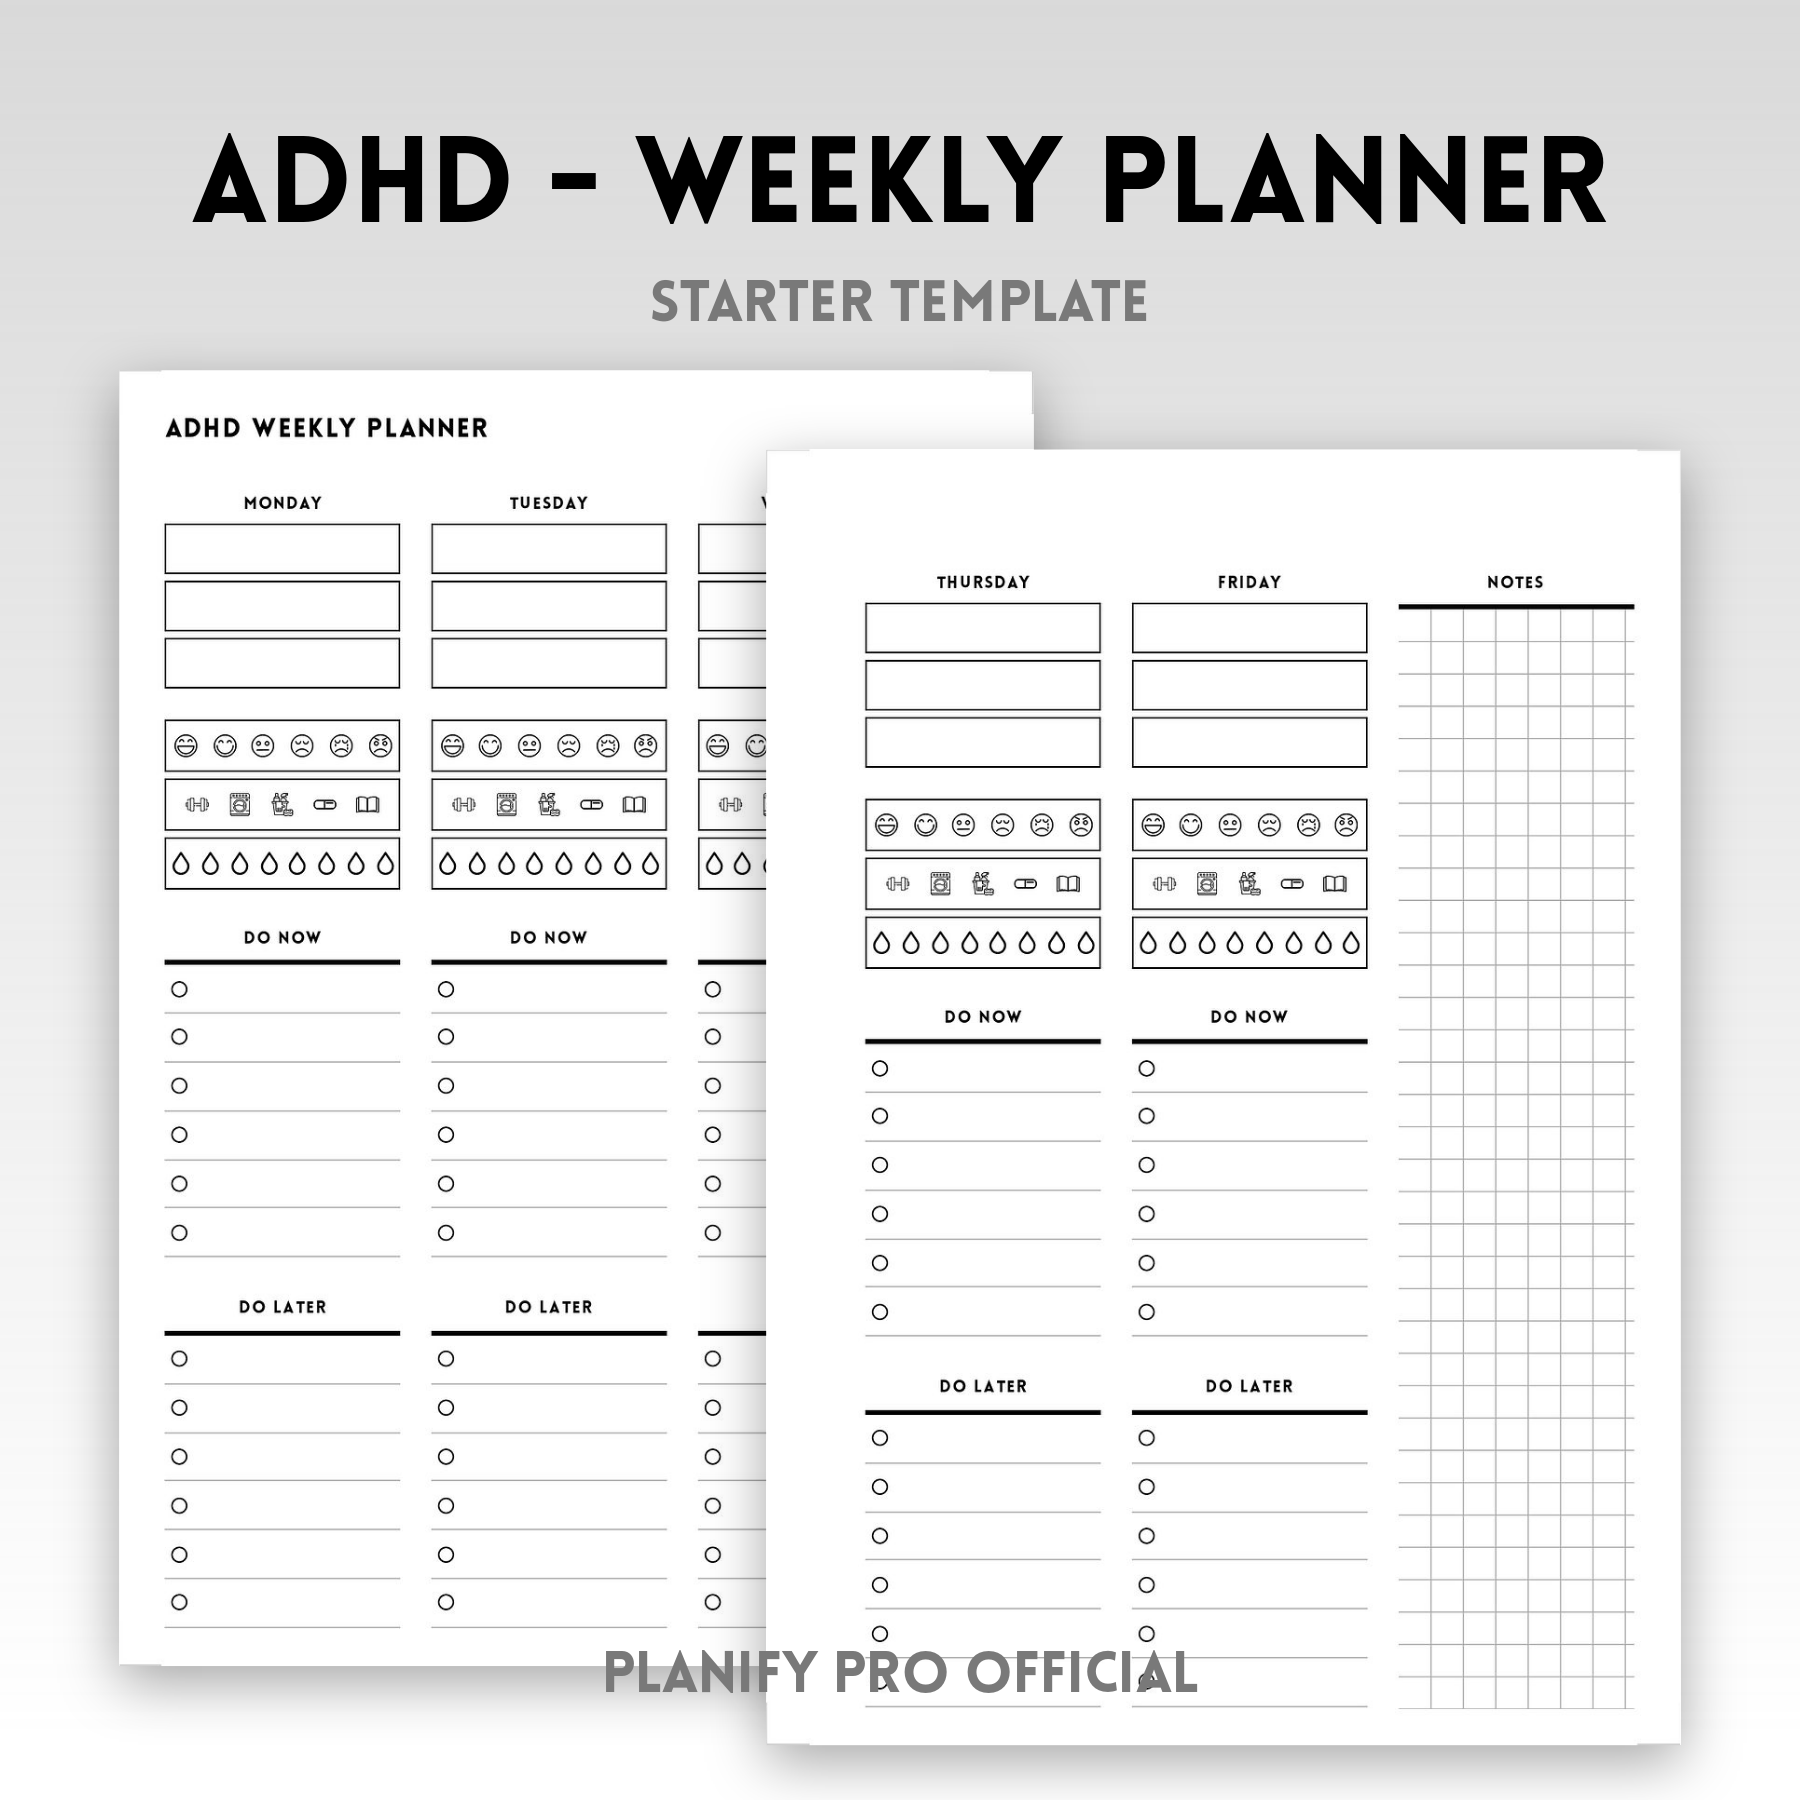 ADHD Planner Starter Templates Planify Pro